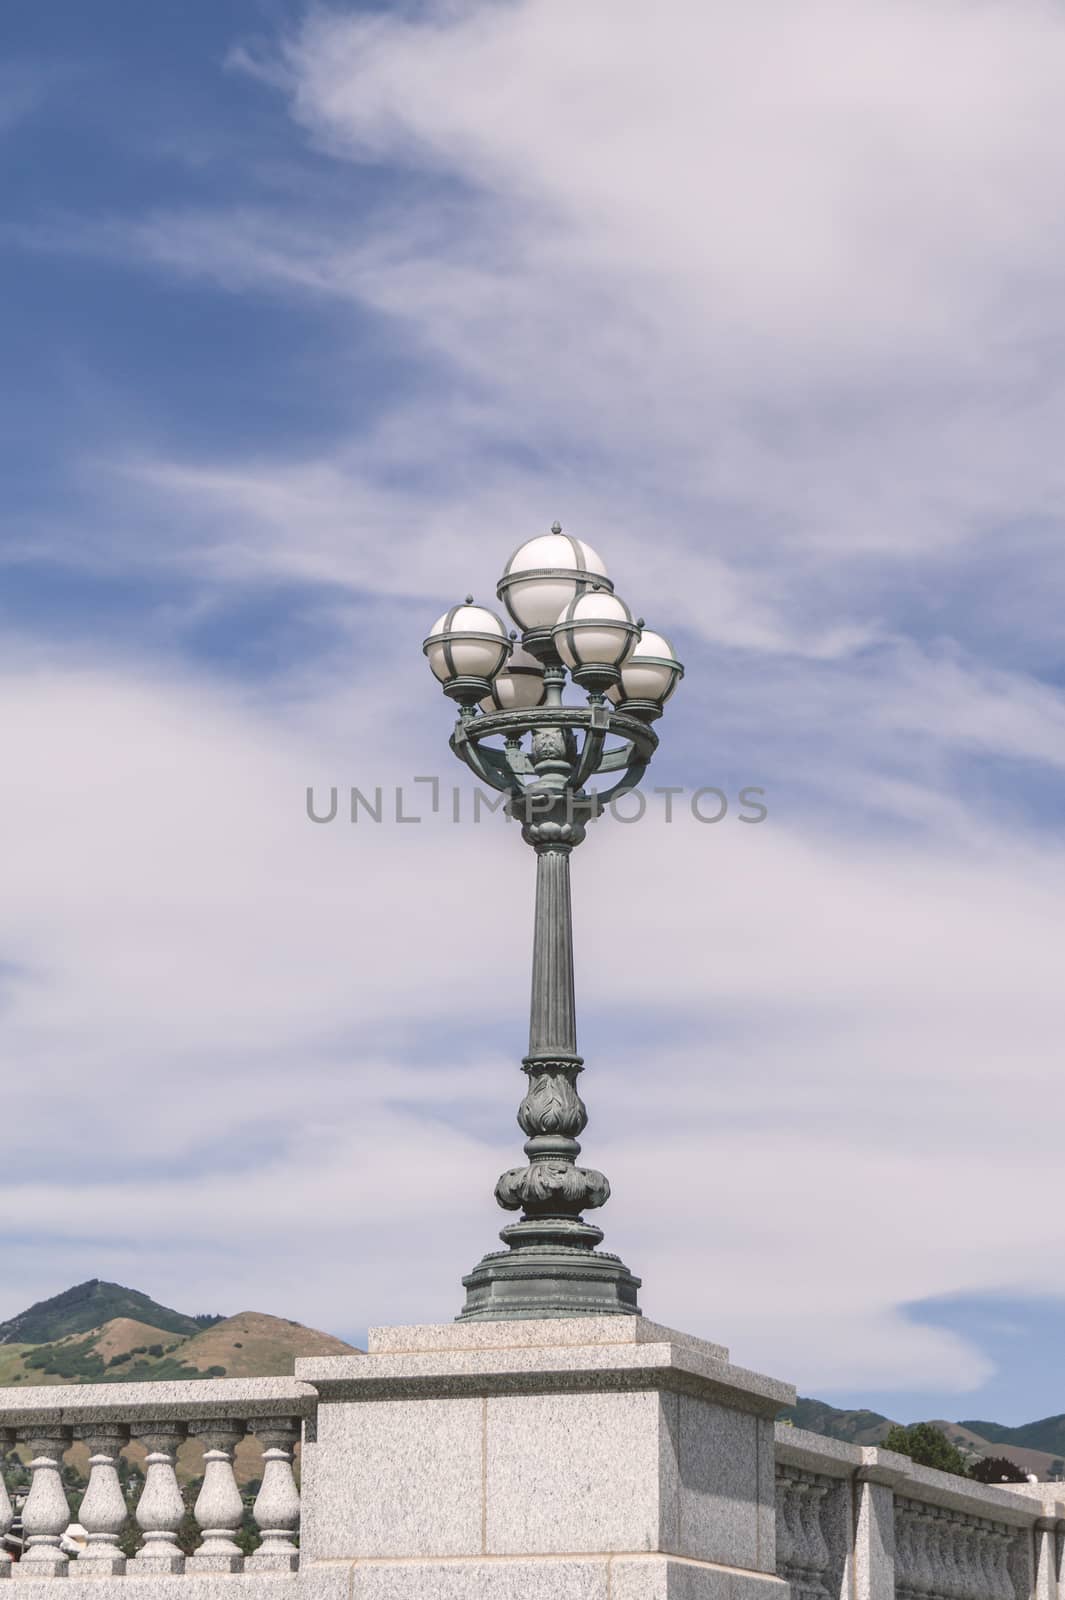 Ancient street lamp with white spheres in daylight